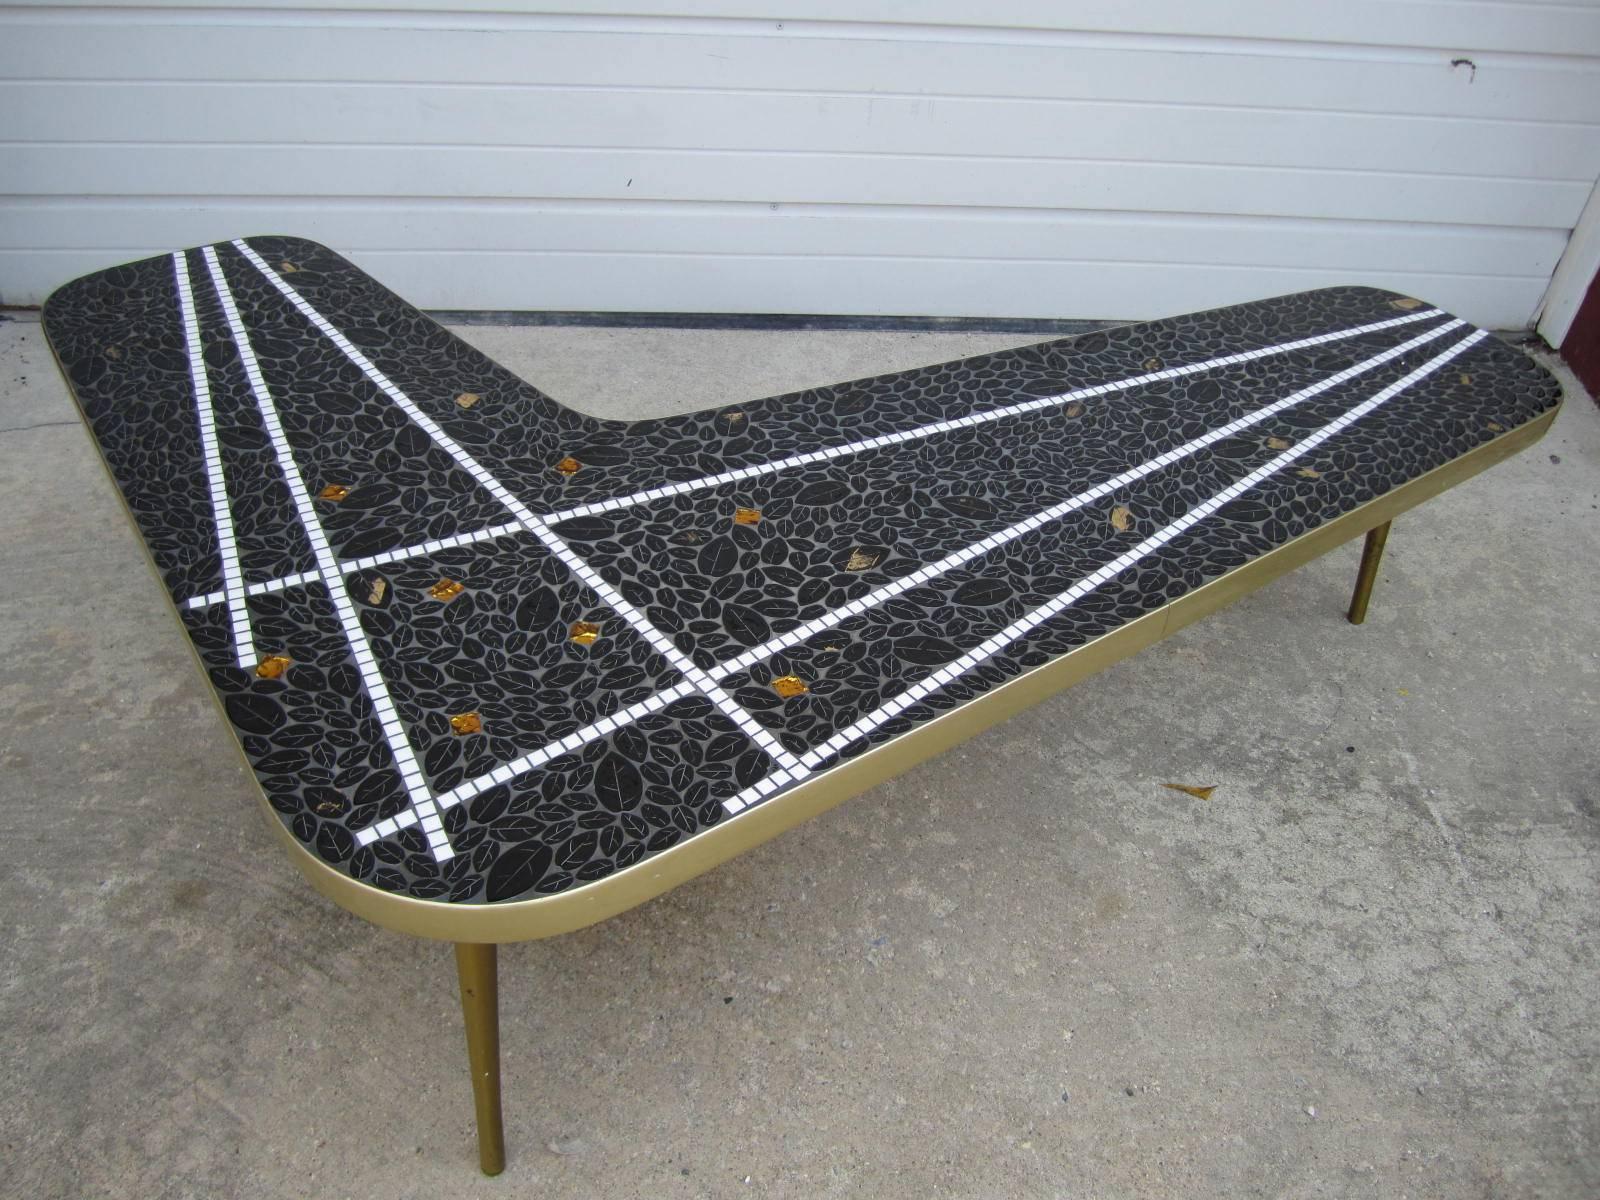 Gorgeous boomerang tile top mosaic coffee table. We love the black leaf shaped tiles mixed with the white radiating stripes and flecks of gold through-out.